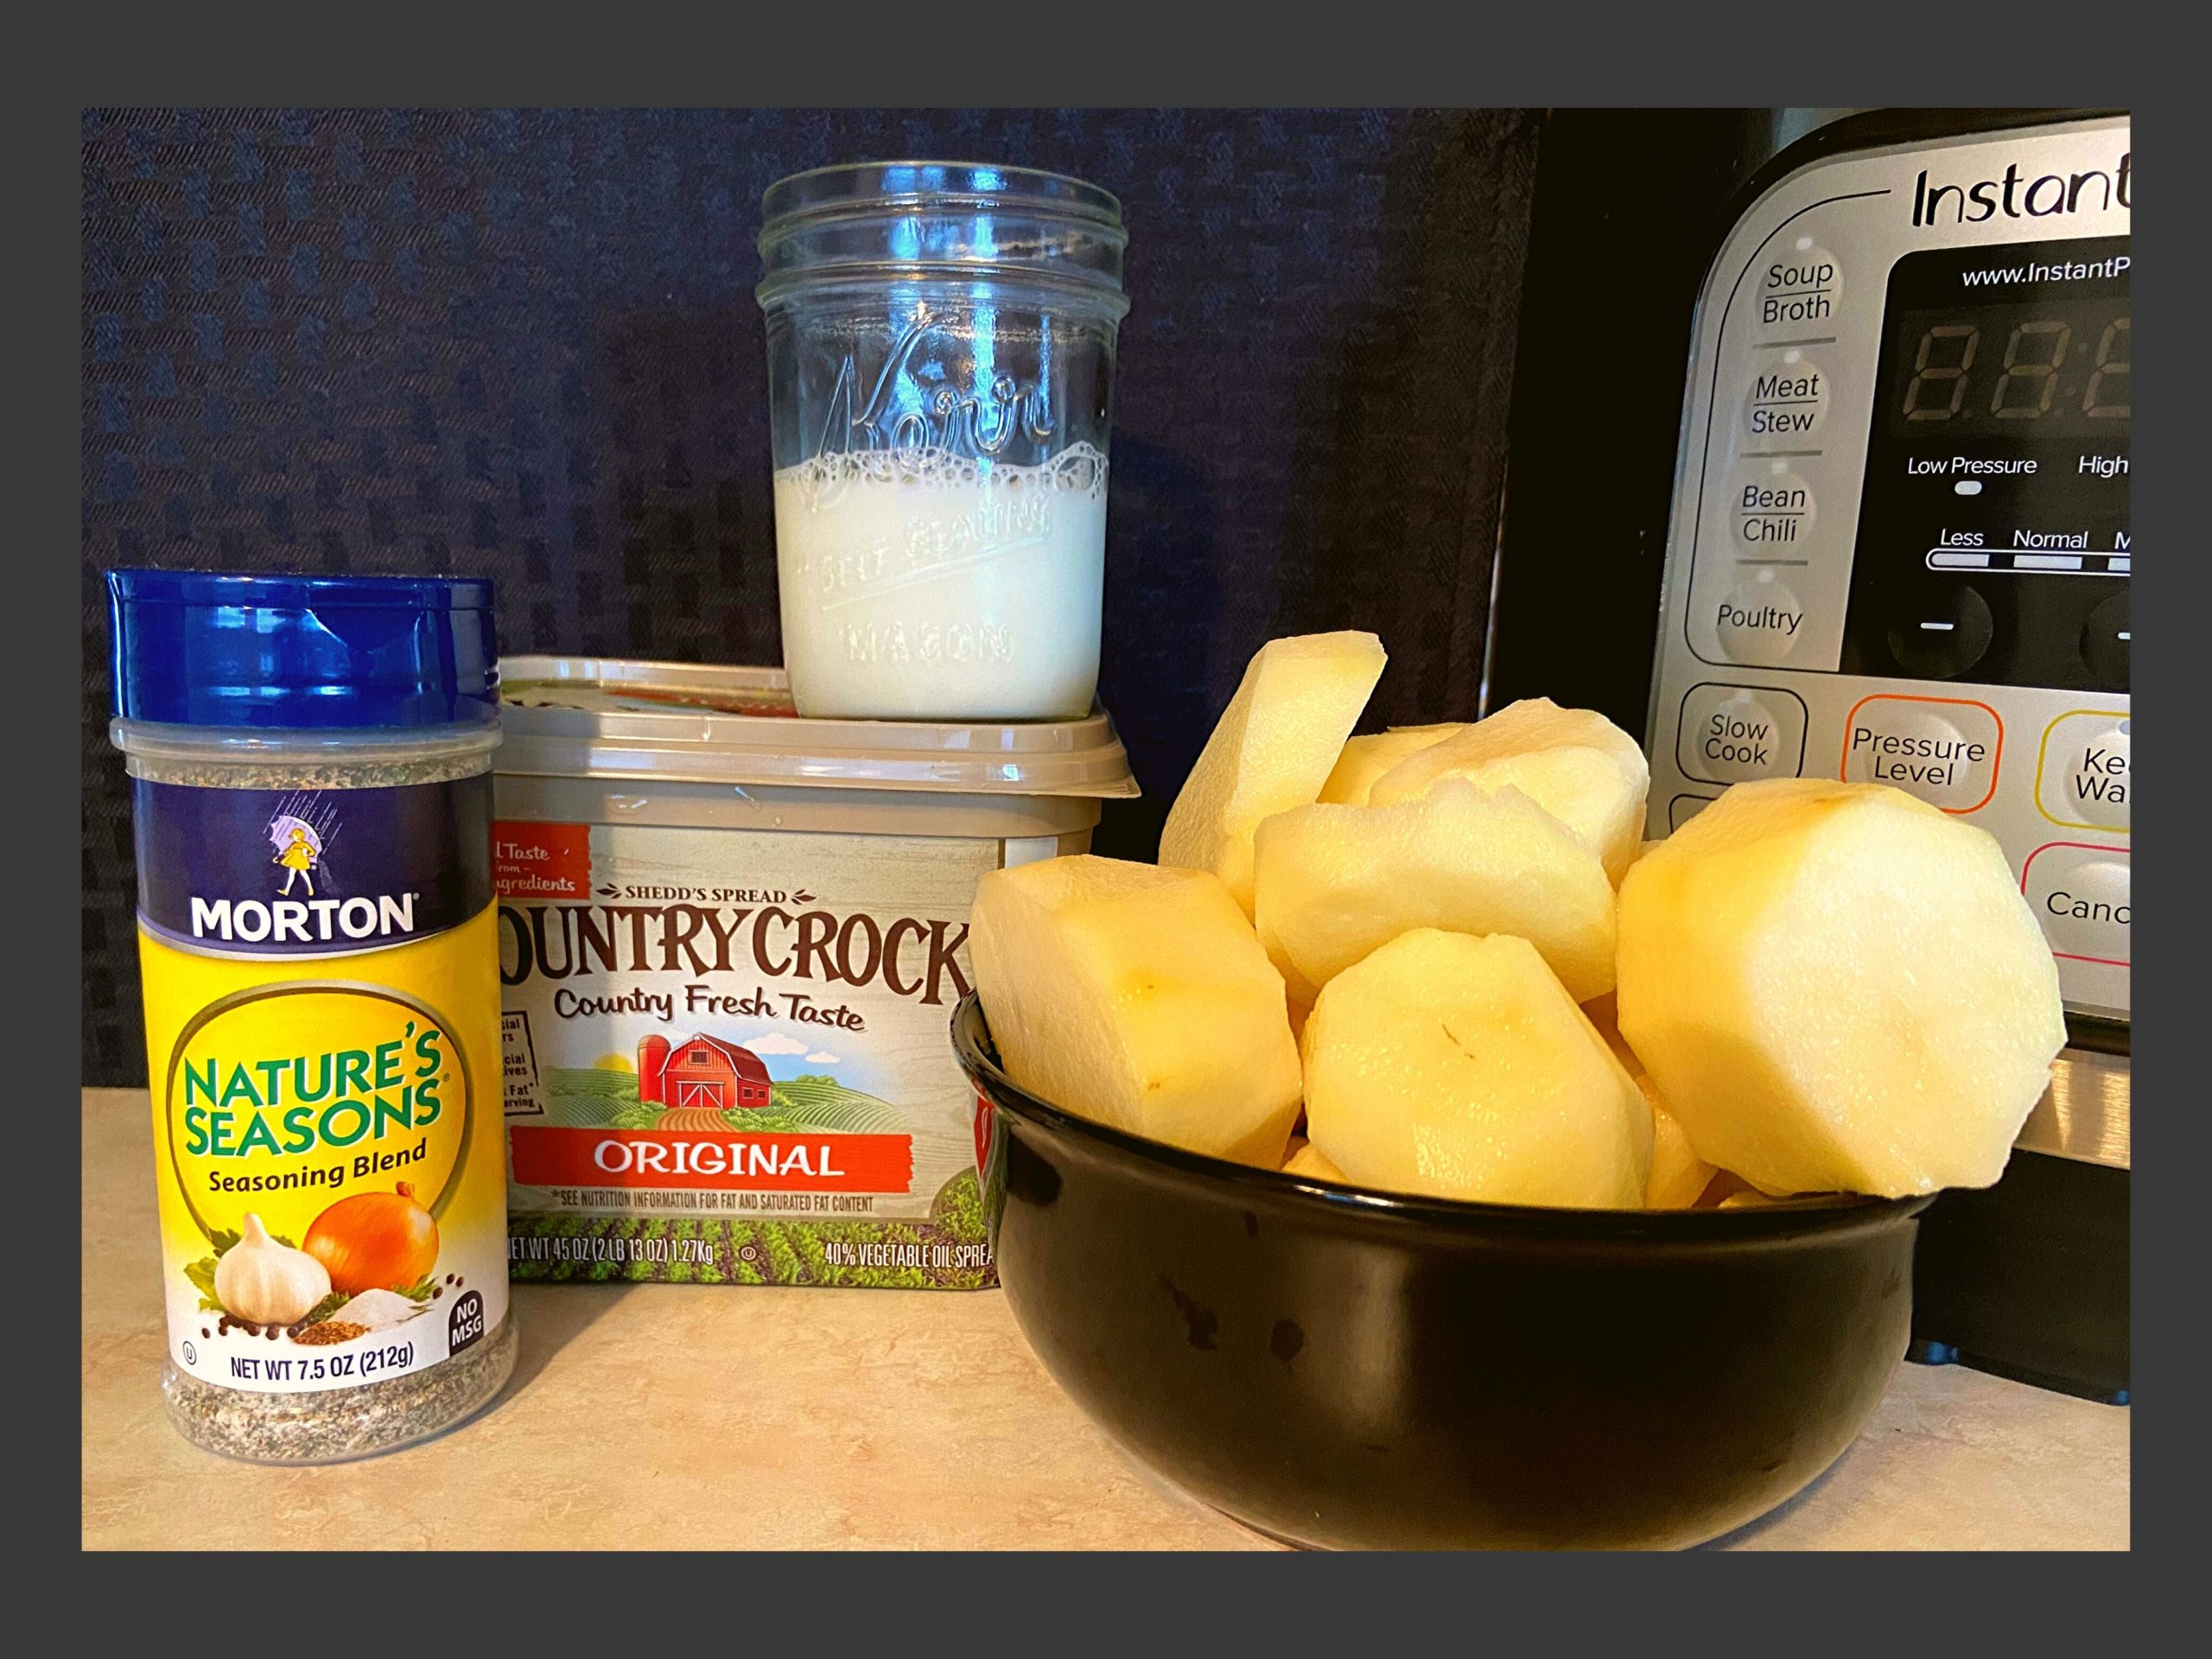 Sliced and peeled potatoes, container of butter, cup of milk, and nature seasoning on a kitchen counter in front of an Instant Pot.